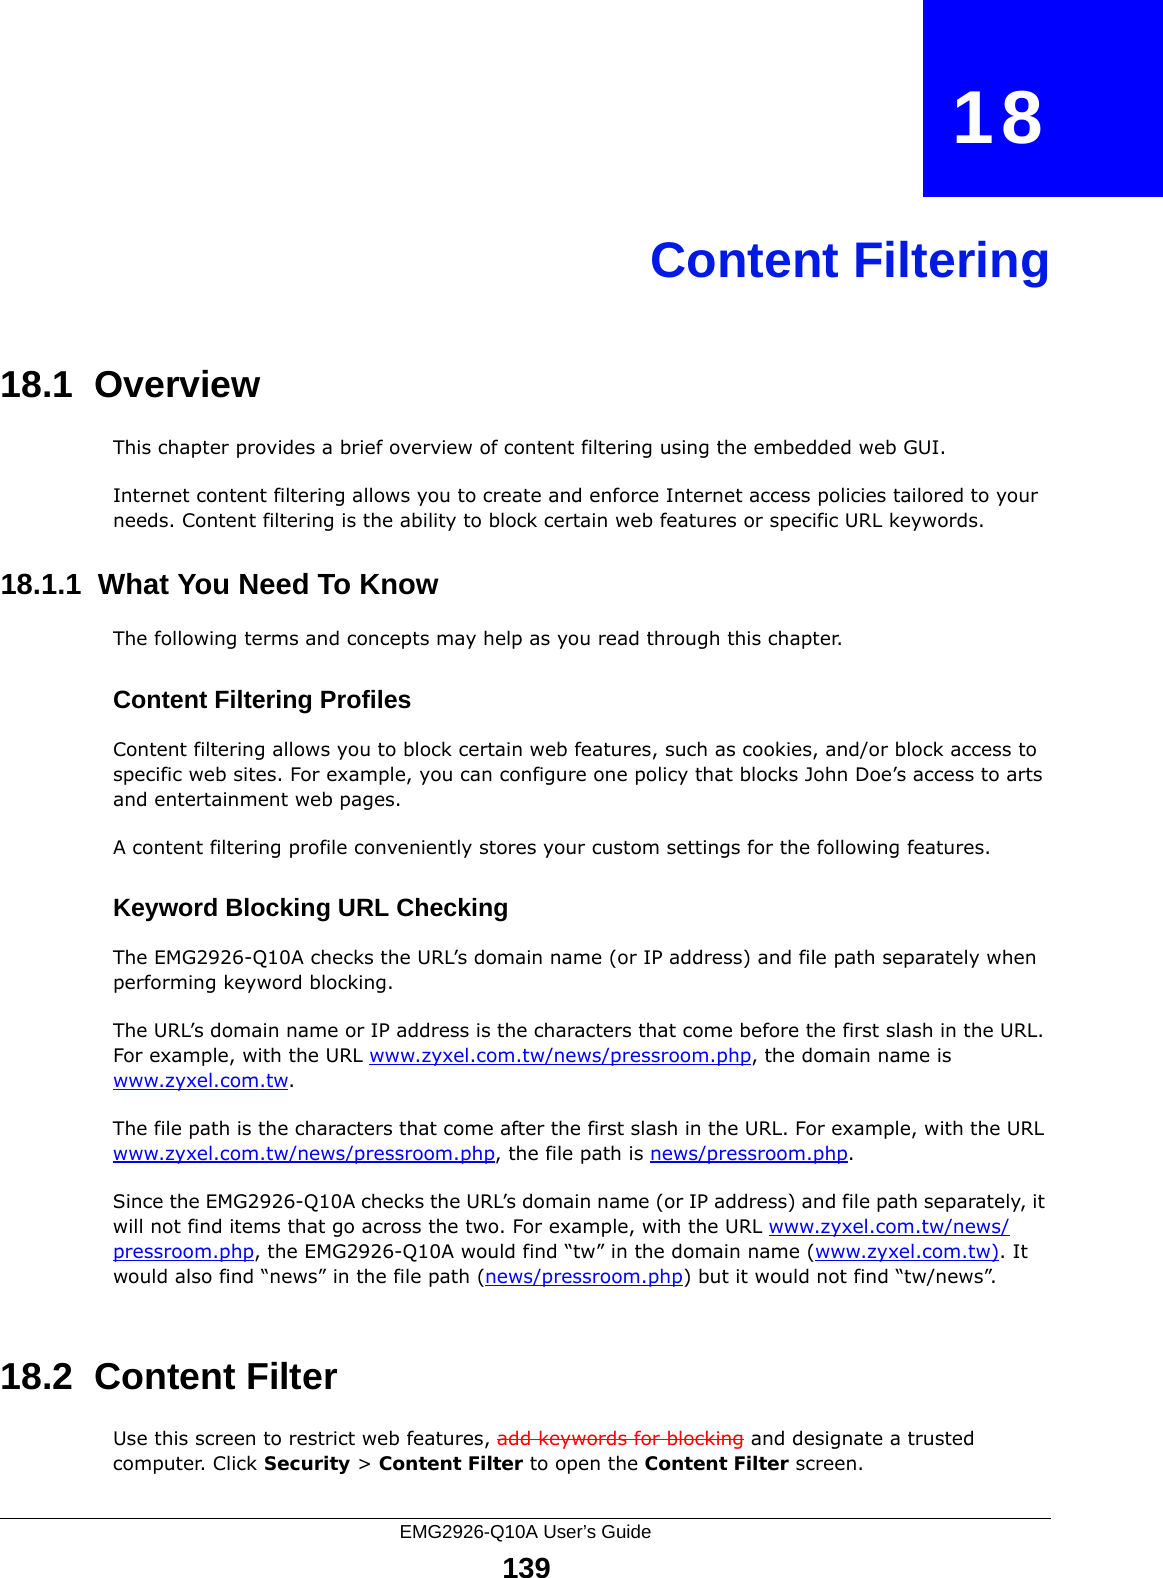 EMG2926-Q10A User’s Guide139CHAPTER   18Content Filtering18.1  OverviewThis chapter provides a brief overview of content filtering using the embedded web GUI.Internet content filtering allows you to create and enforce Internet access policies tailored to your needs. Content filtering is the ability to block certain web features or specific URL keywords.18.1.1  What You Need To KnowThe following terms and concepts may help as you read through this chapter.Content Filtering ProfilesContent filtering allows you to block certain web features, such as cookies, and/or block access to specific web sites. For example, you can configure one policy that blocks John Doe’s access to arts and entertainment web pages.A content filtering profile conveniently stores your custom settings for the following features.Keyword Blocking URL CheckingThe EMG2926-Q10A checks the URL’s domain name (or IP address) and file path separately when performing keyword blocking. The URL’s domain name or IP address is the characters that come before the first slash in the URL. For example, with the URL www.zyxel.com.tw/news/pressroom.php, the domain name is www.zyxel.com.tw.The file path is the characters that come after the first slash in the URL. For example, with the URL www.zyxel.com.tw/news/pressroom.php, the file path is news/pressroom.php.Since the EMG2926-Q10A checks the URL’s domain name (or IP address) and file path separately, it will not find items that go across the two. For example, with the URL www.zyxel.com.tw/news/pressroom.php, the EMG2926-Q10A would find “tw” in the domain name (www.zyxel.com.tw). It would also find “news” in the file path (news/pressroom.php) but it would not find “tw/news”.18.2  Content FilterUse this screen to restrict web features, add keywords for blocking and designate a trusted computer. Click Security &gt; Content Filter to open the Content Filter screen. 